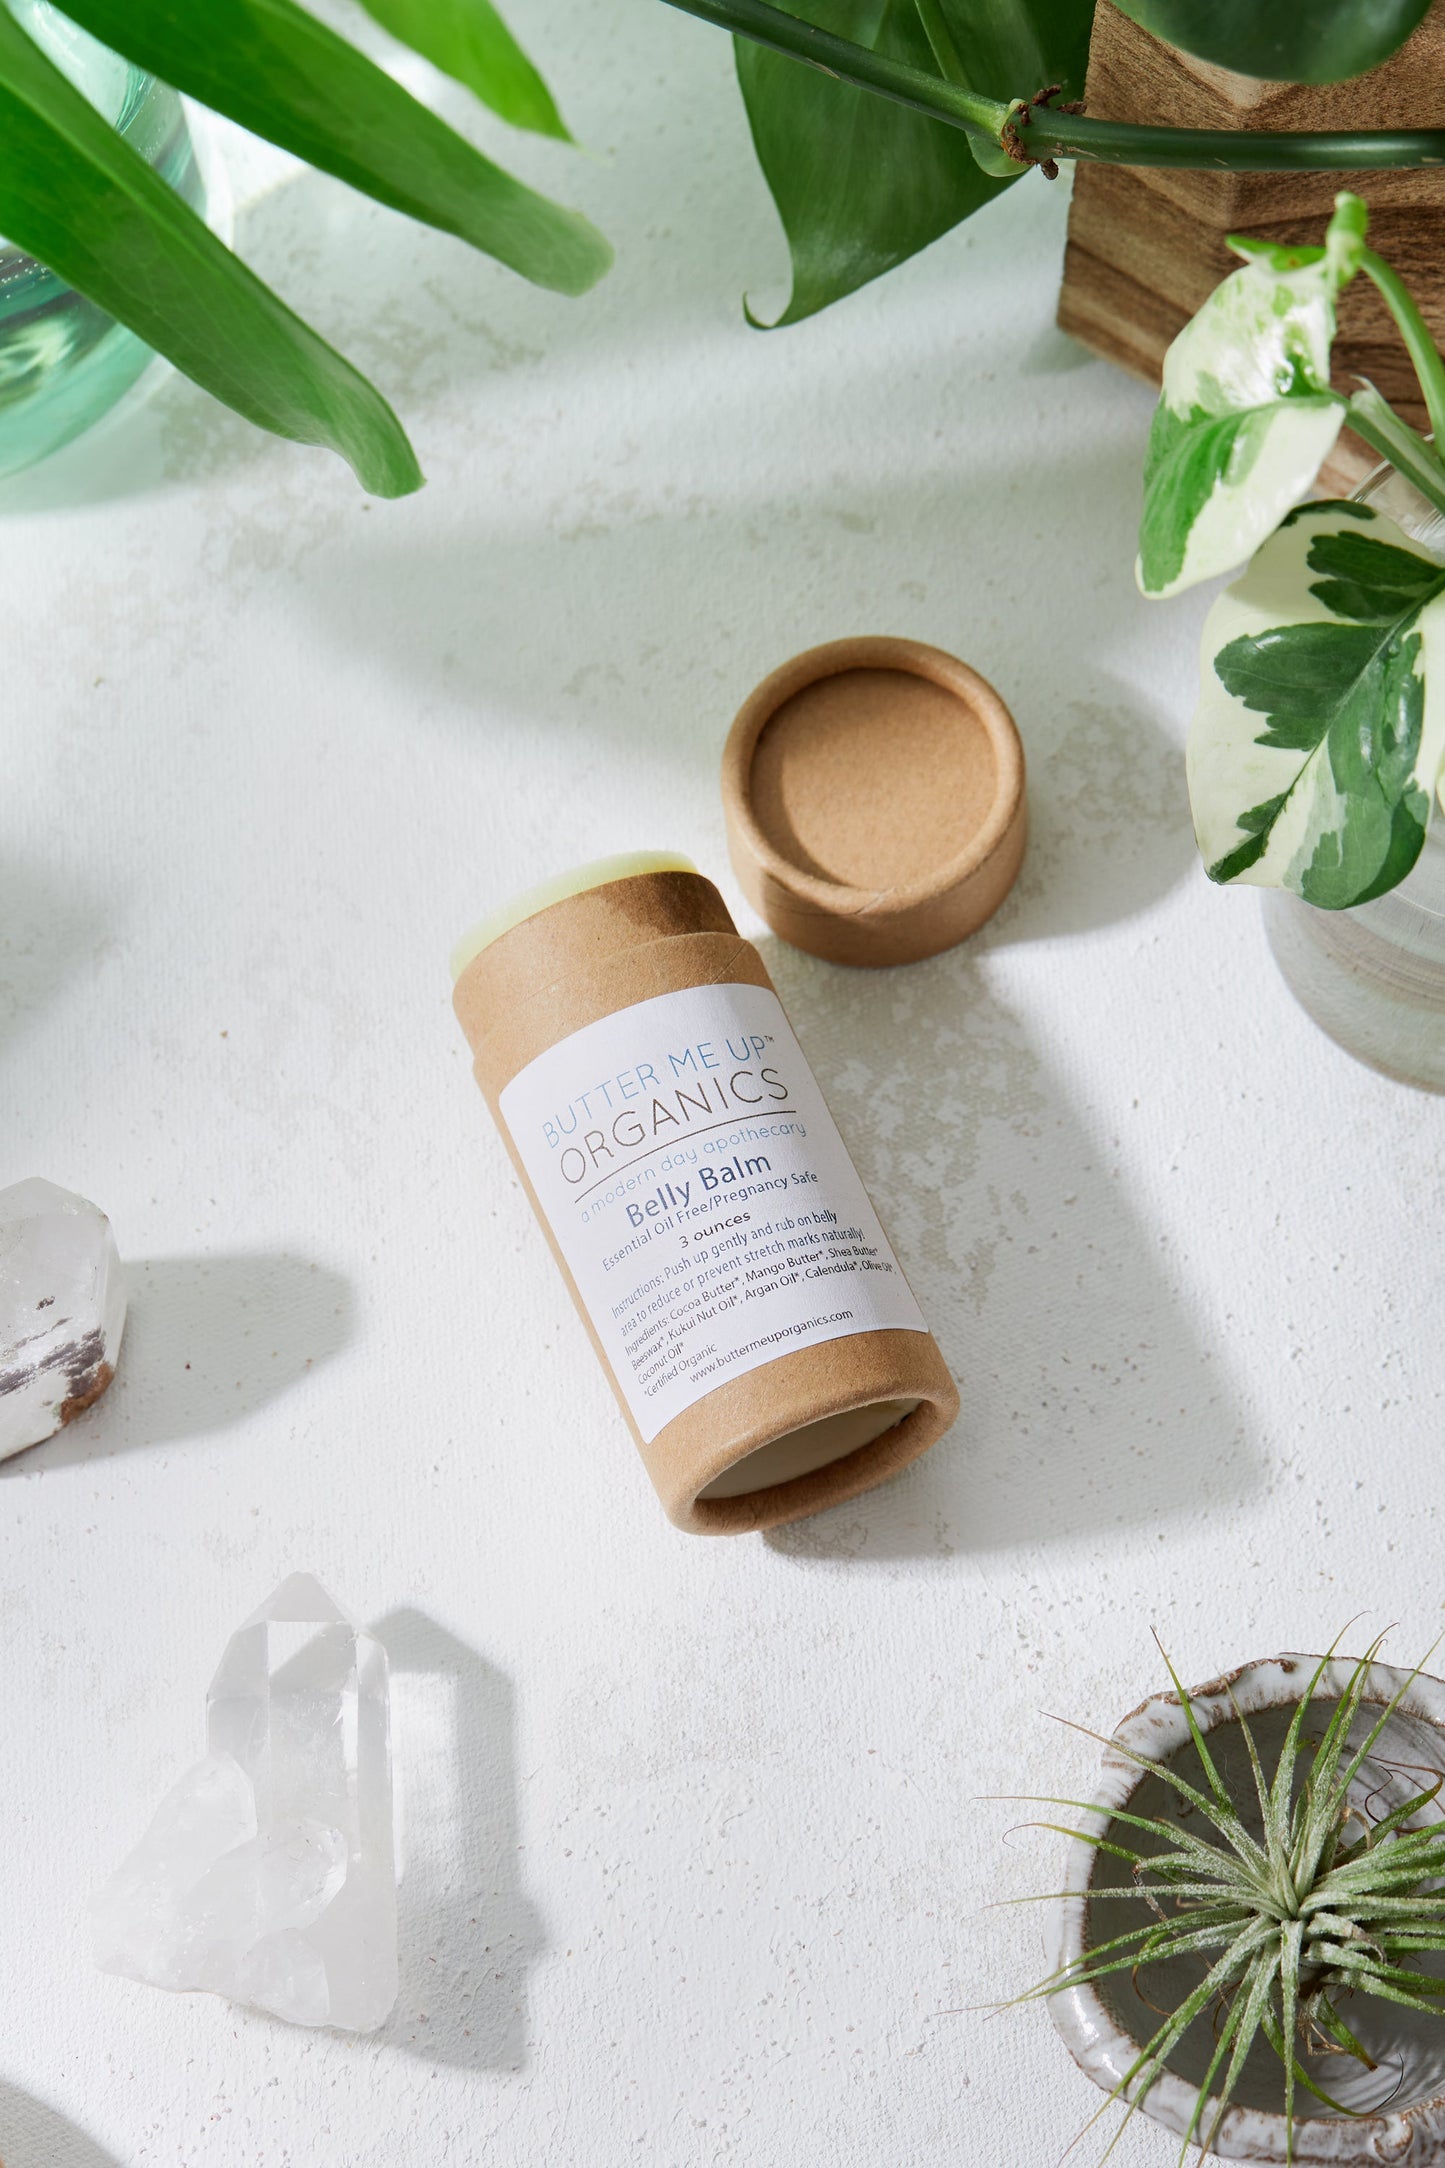 A biodegradable cardboard tube labeled "White Smokey Belly Balm" lies opened on a white surface, surrounded by plants and crystals, offering a blend of organic belly balm for stretch mark prevention and hydrating skin care.